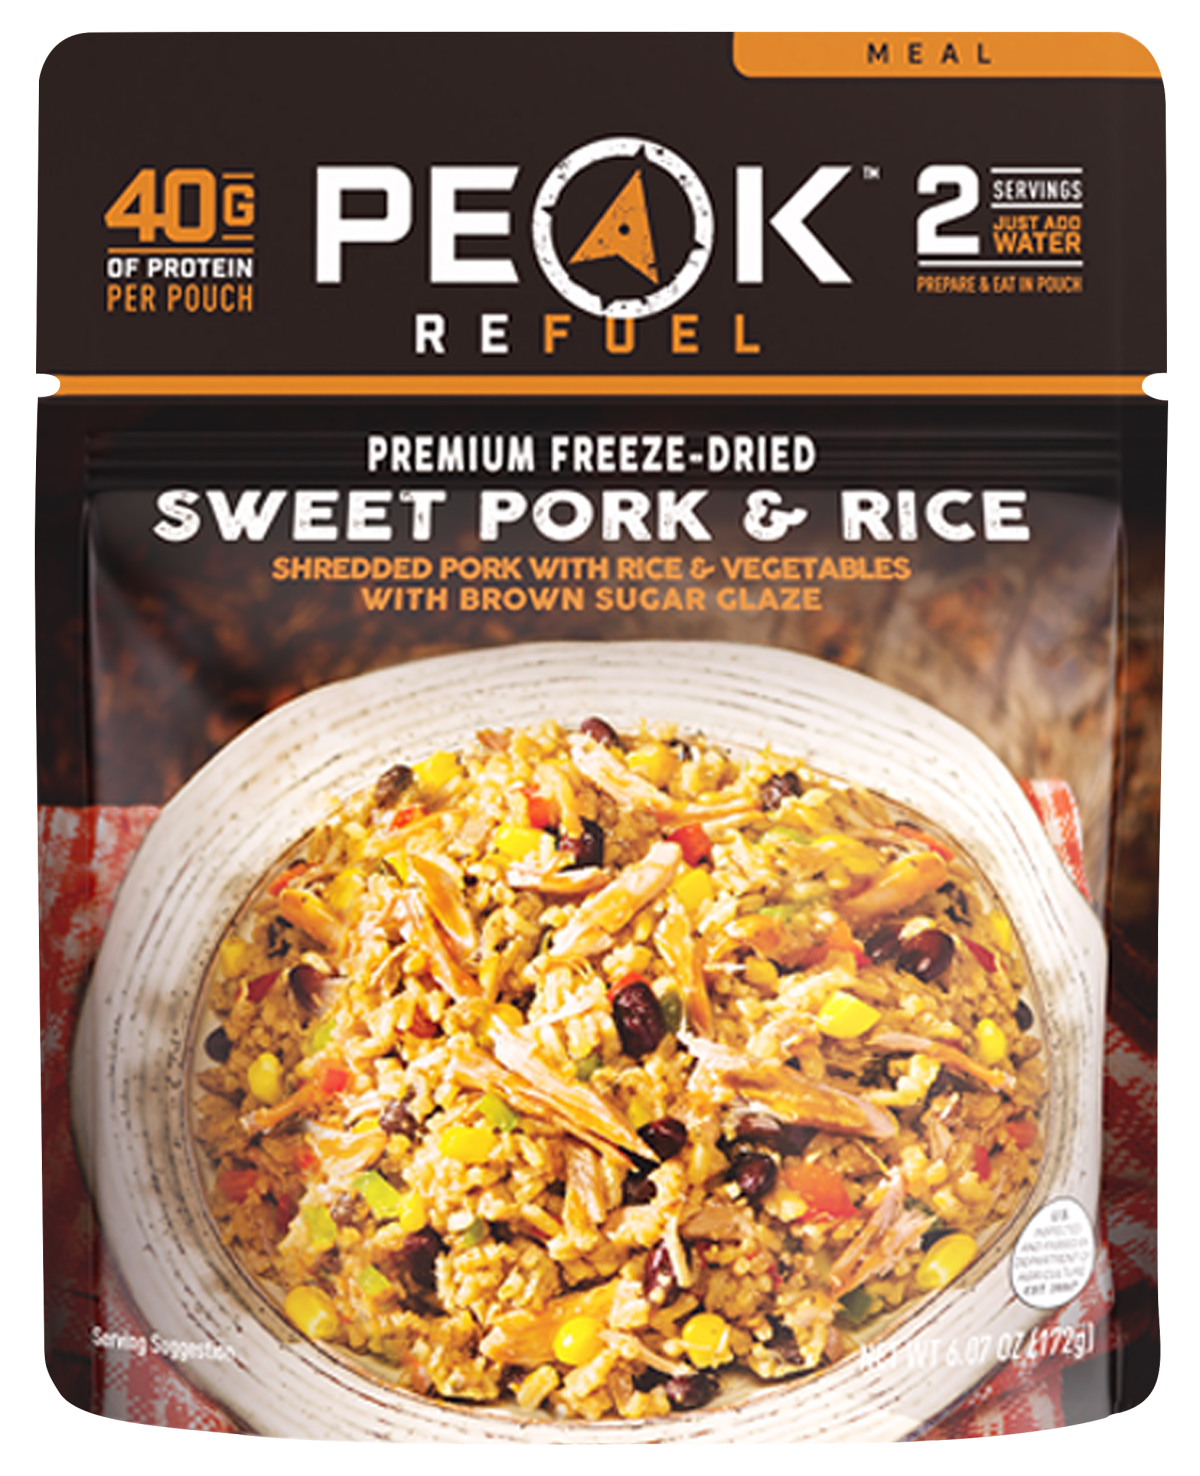 Peak Refuel Freeze-Dried Sweet Pork and Rice Pouch